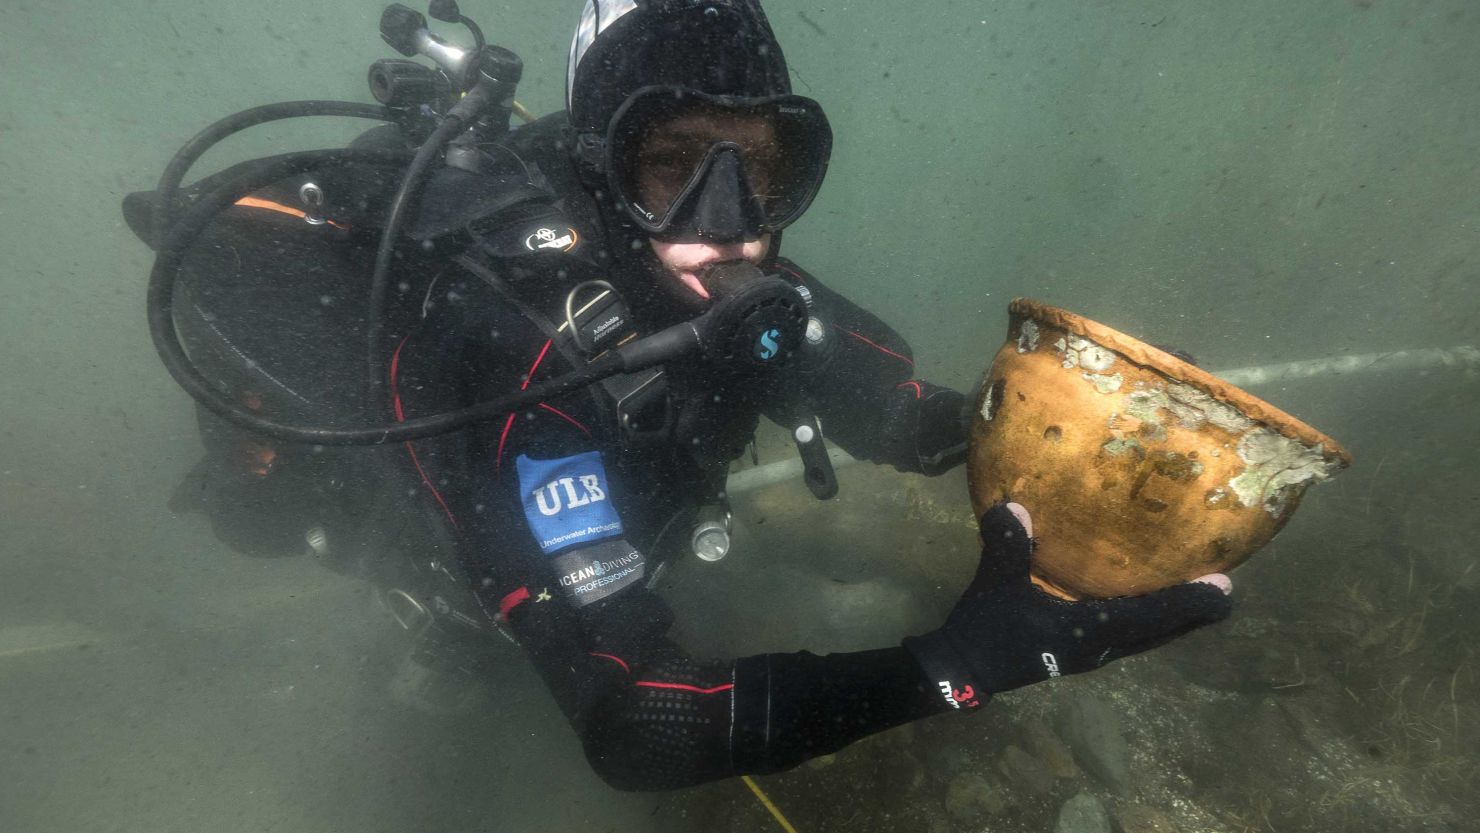 Divers found an extraordinary set of artefacts on the underwater reef.